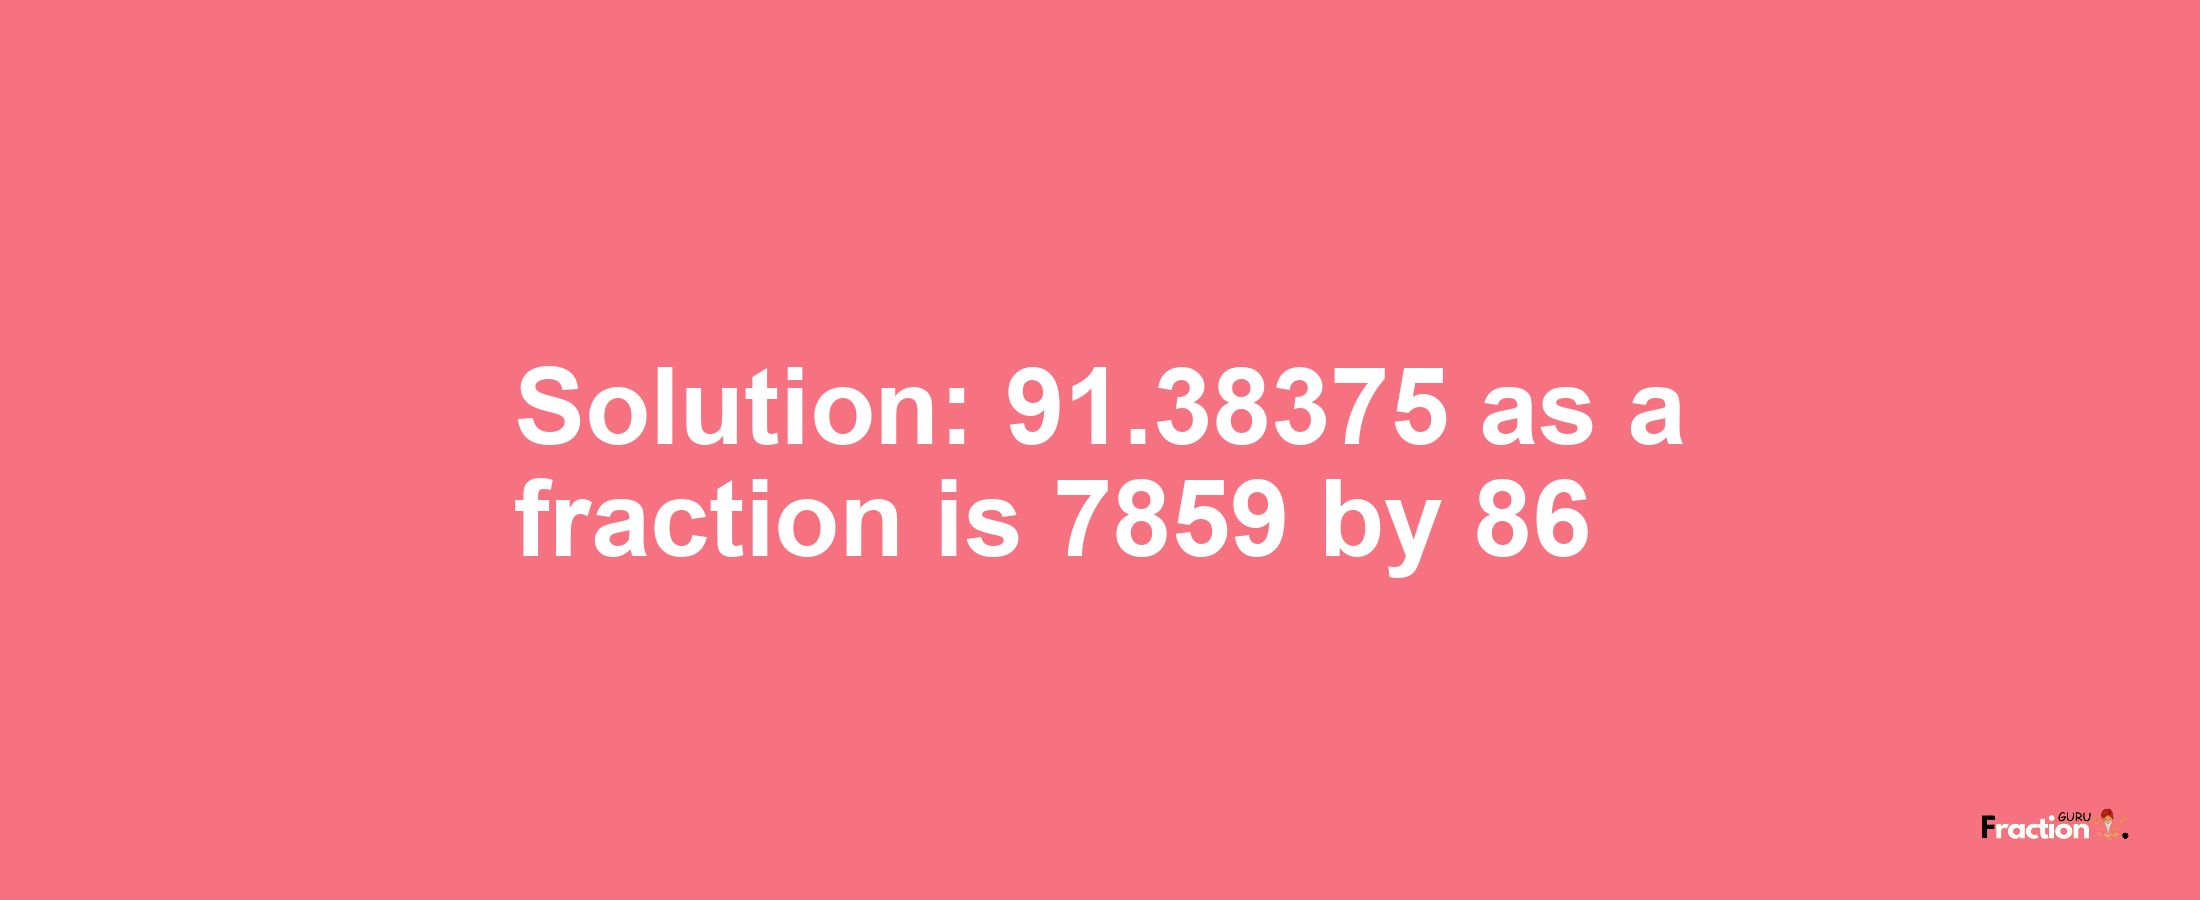 Solution:91.38375 as a fraction is 7859/86